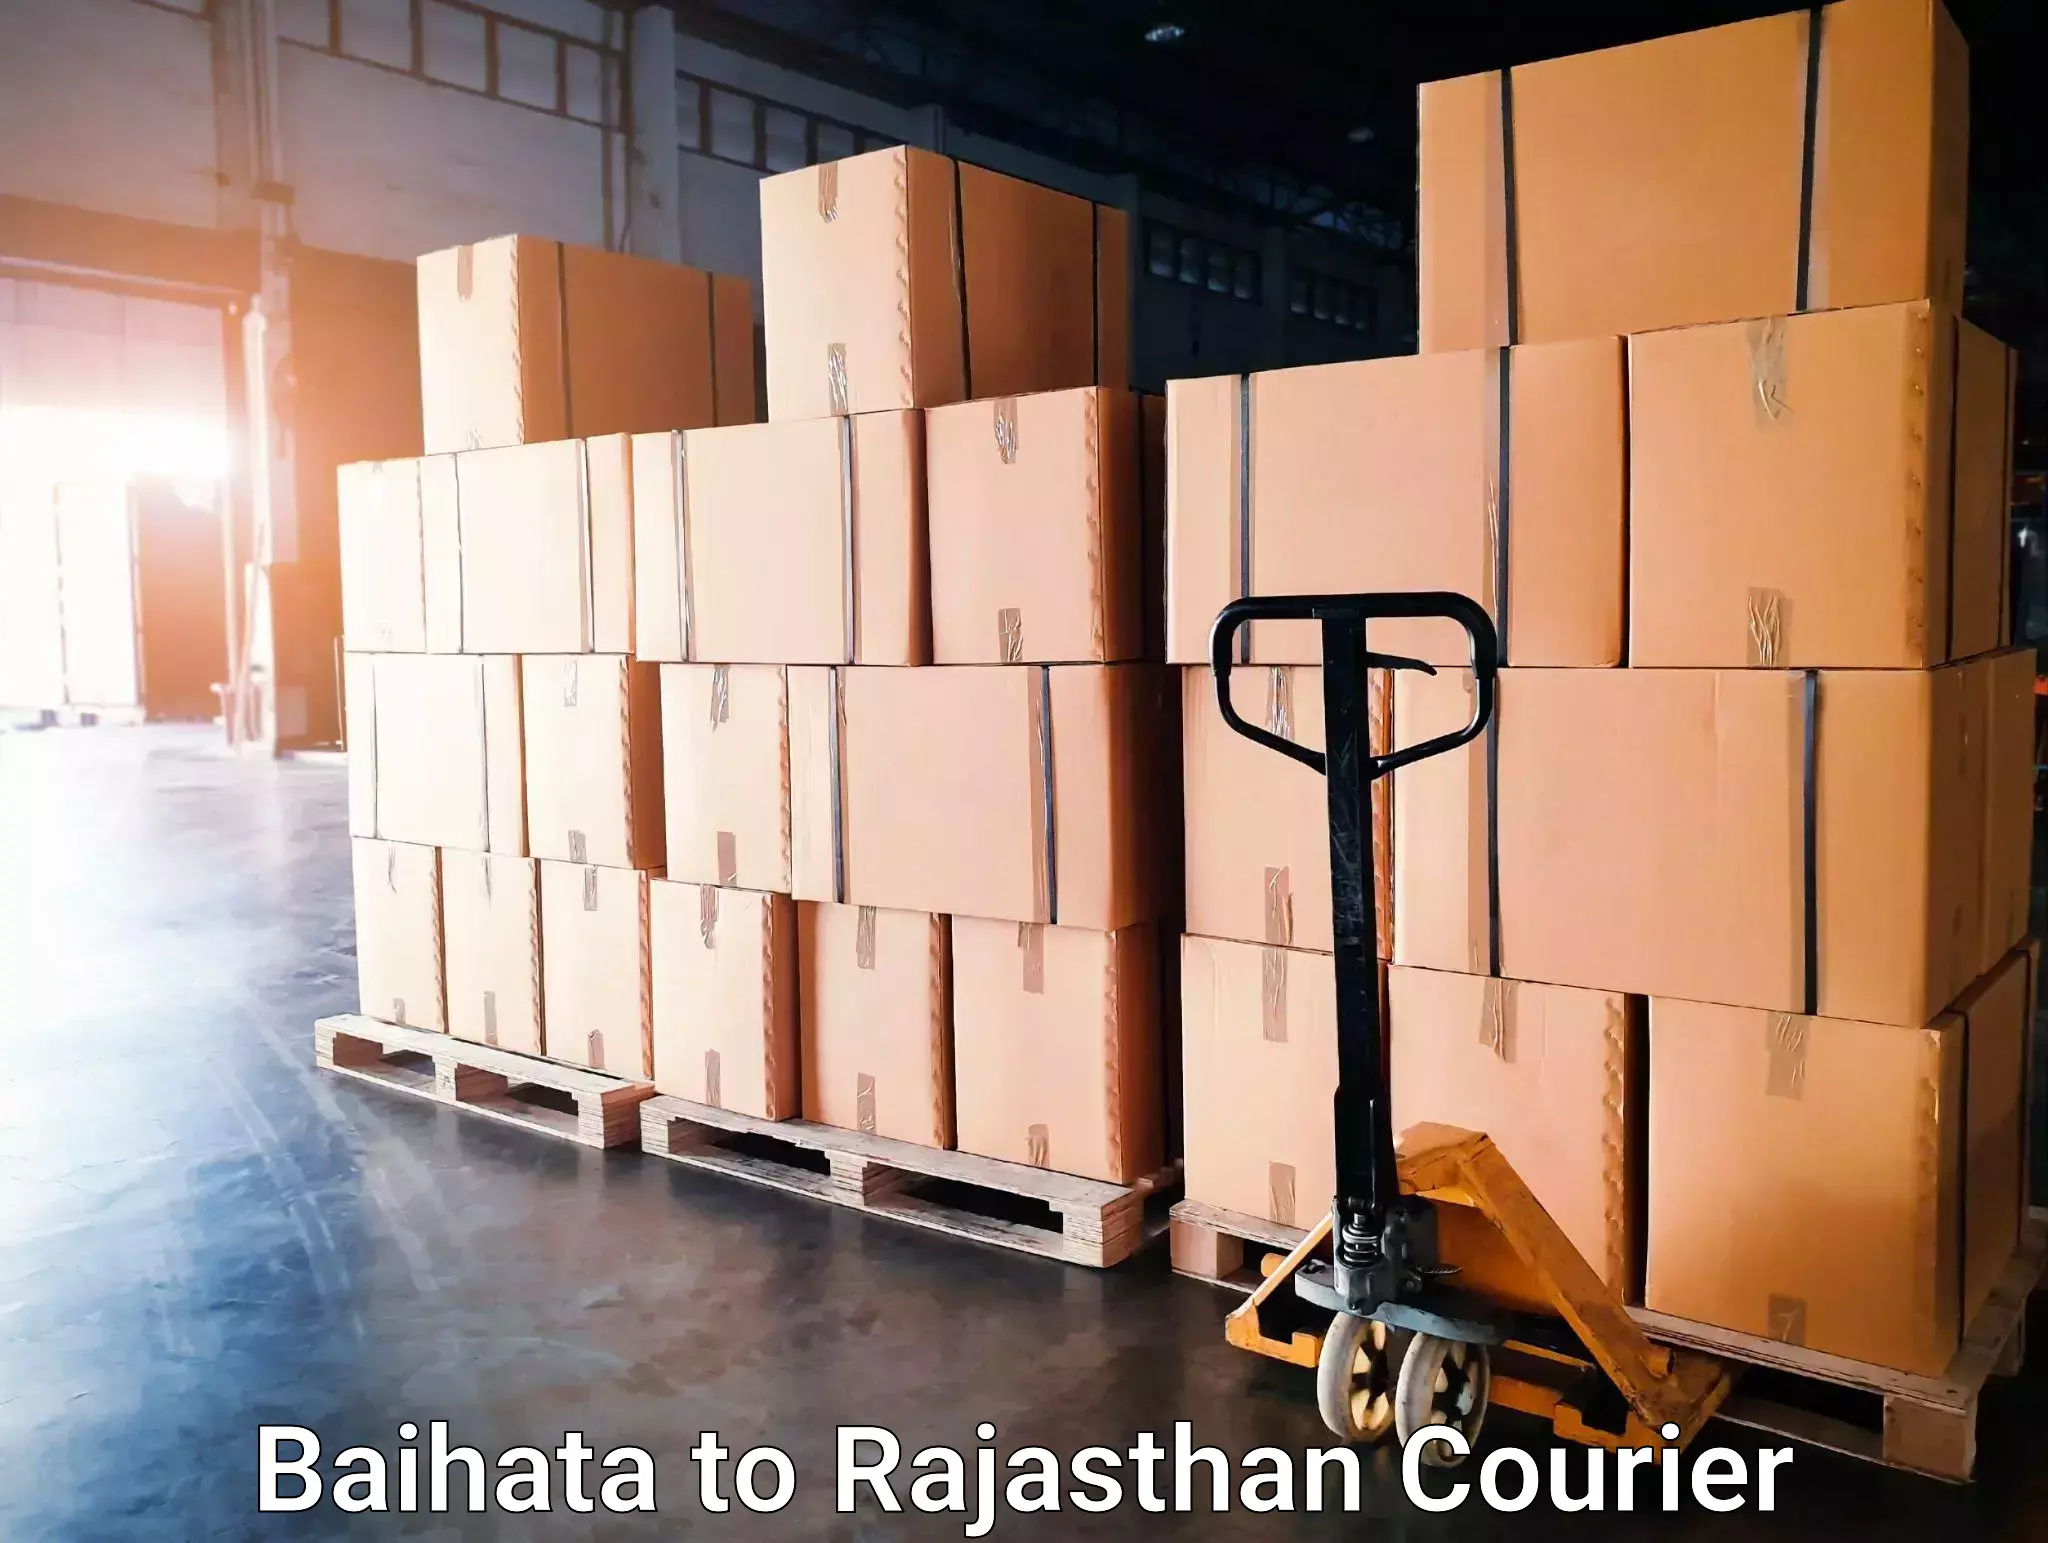 Local delivery service Baihata to Jaipur